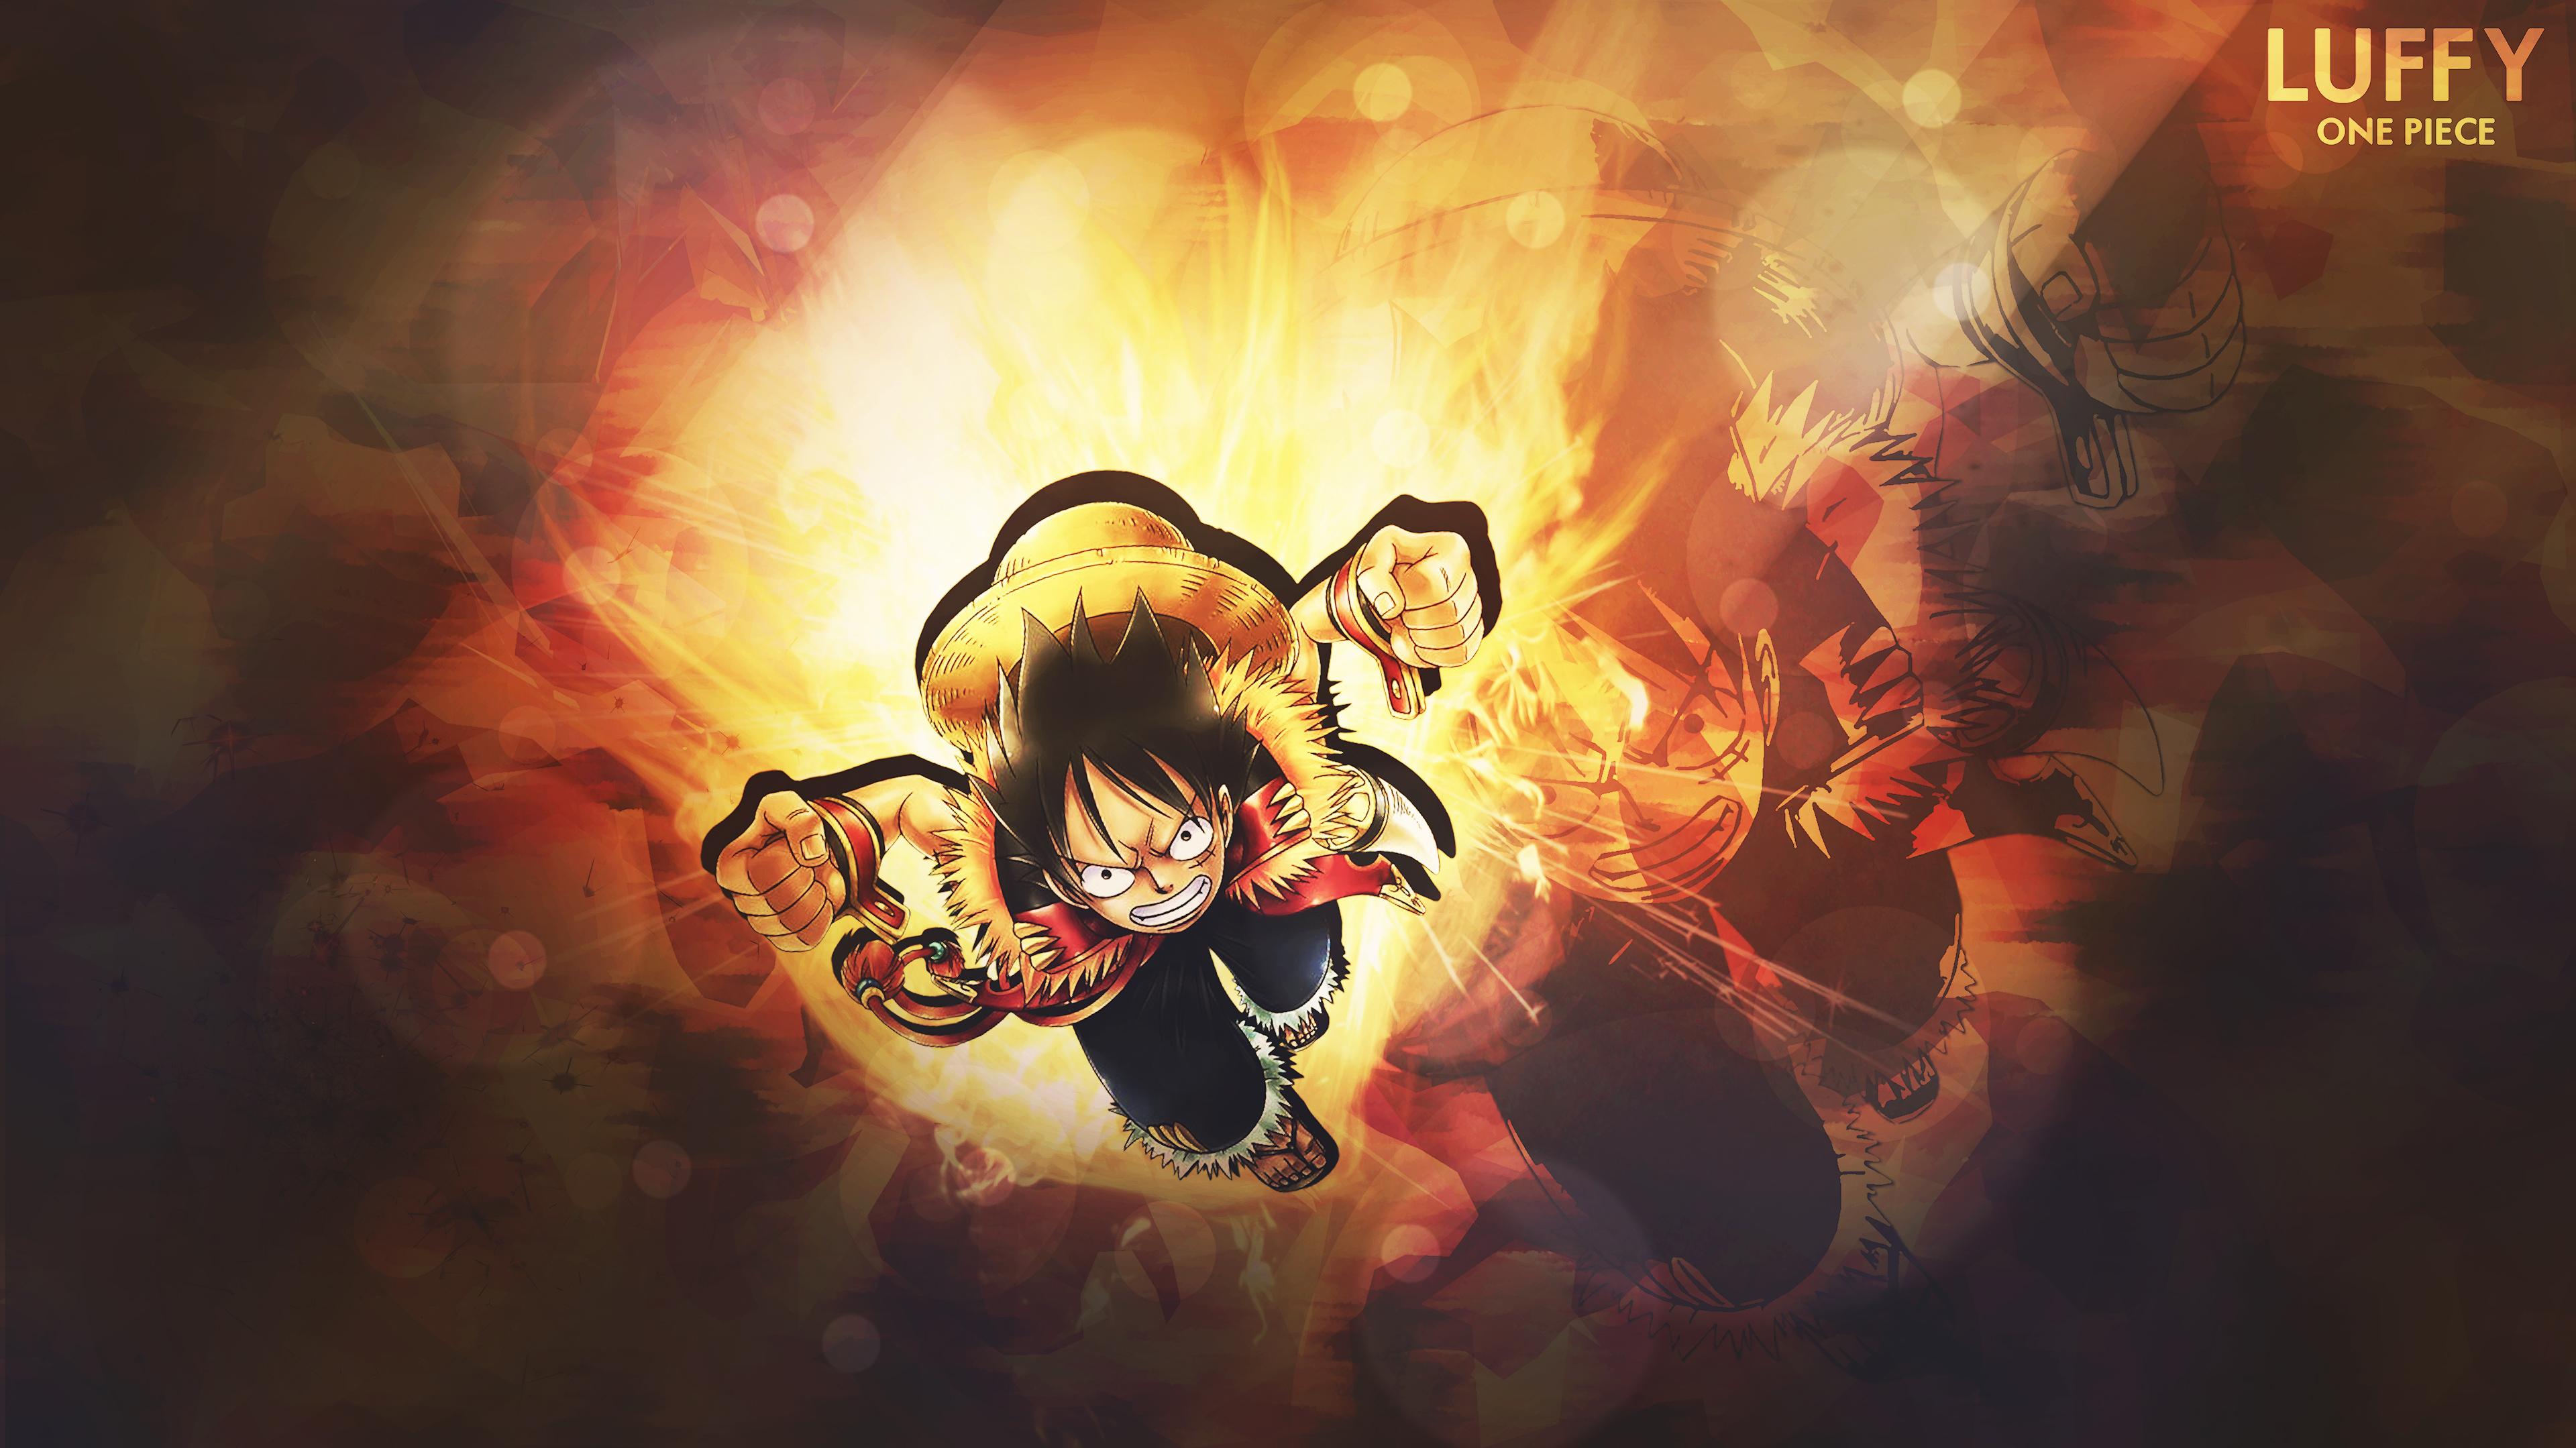 Anime One Piece 4k Ultra HD Wallpaper By Roningfx